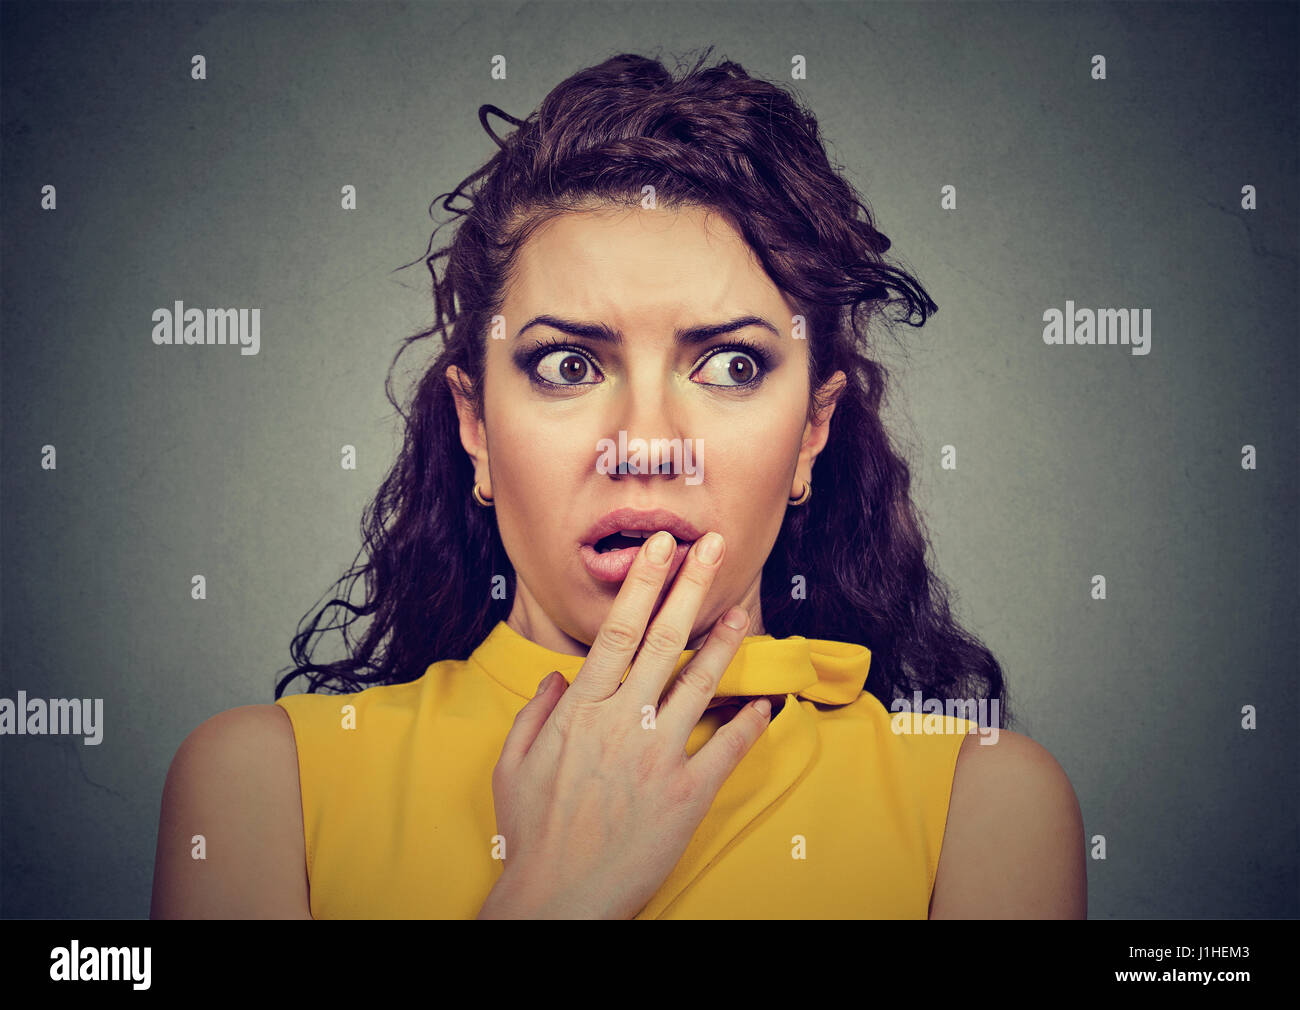 Scared Shocked Woman Isolated On Gray Background Stock